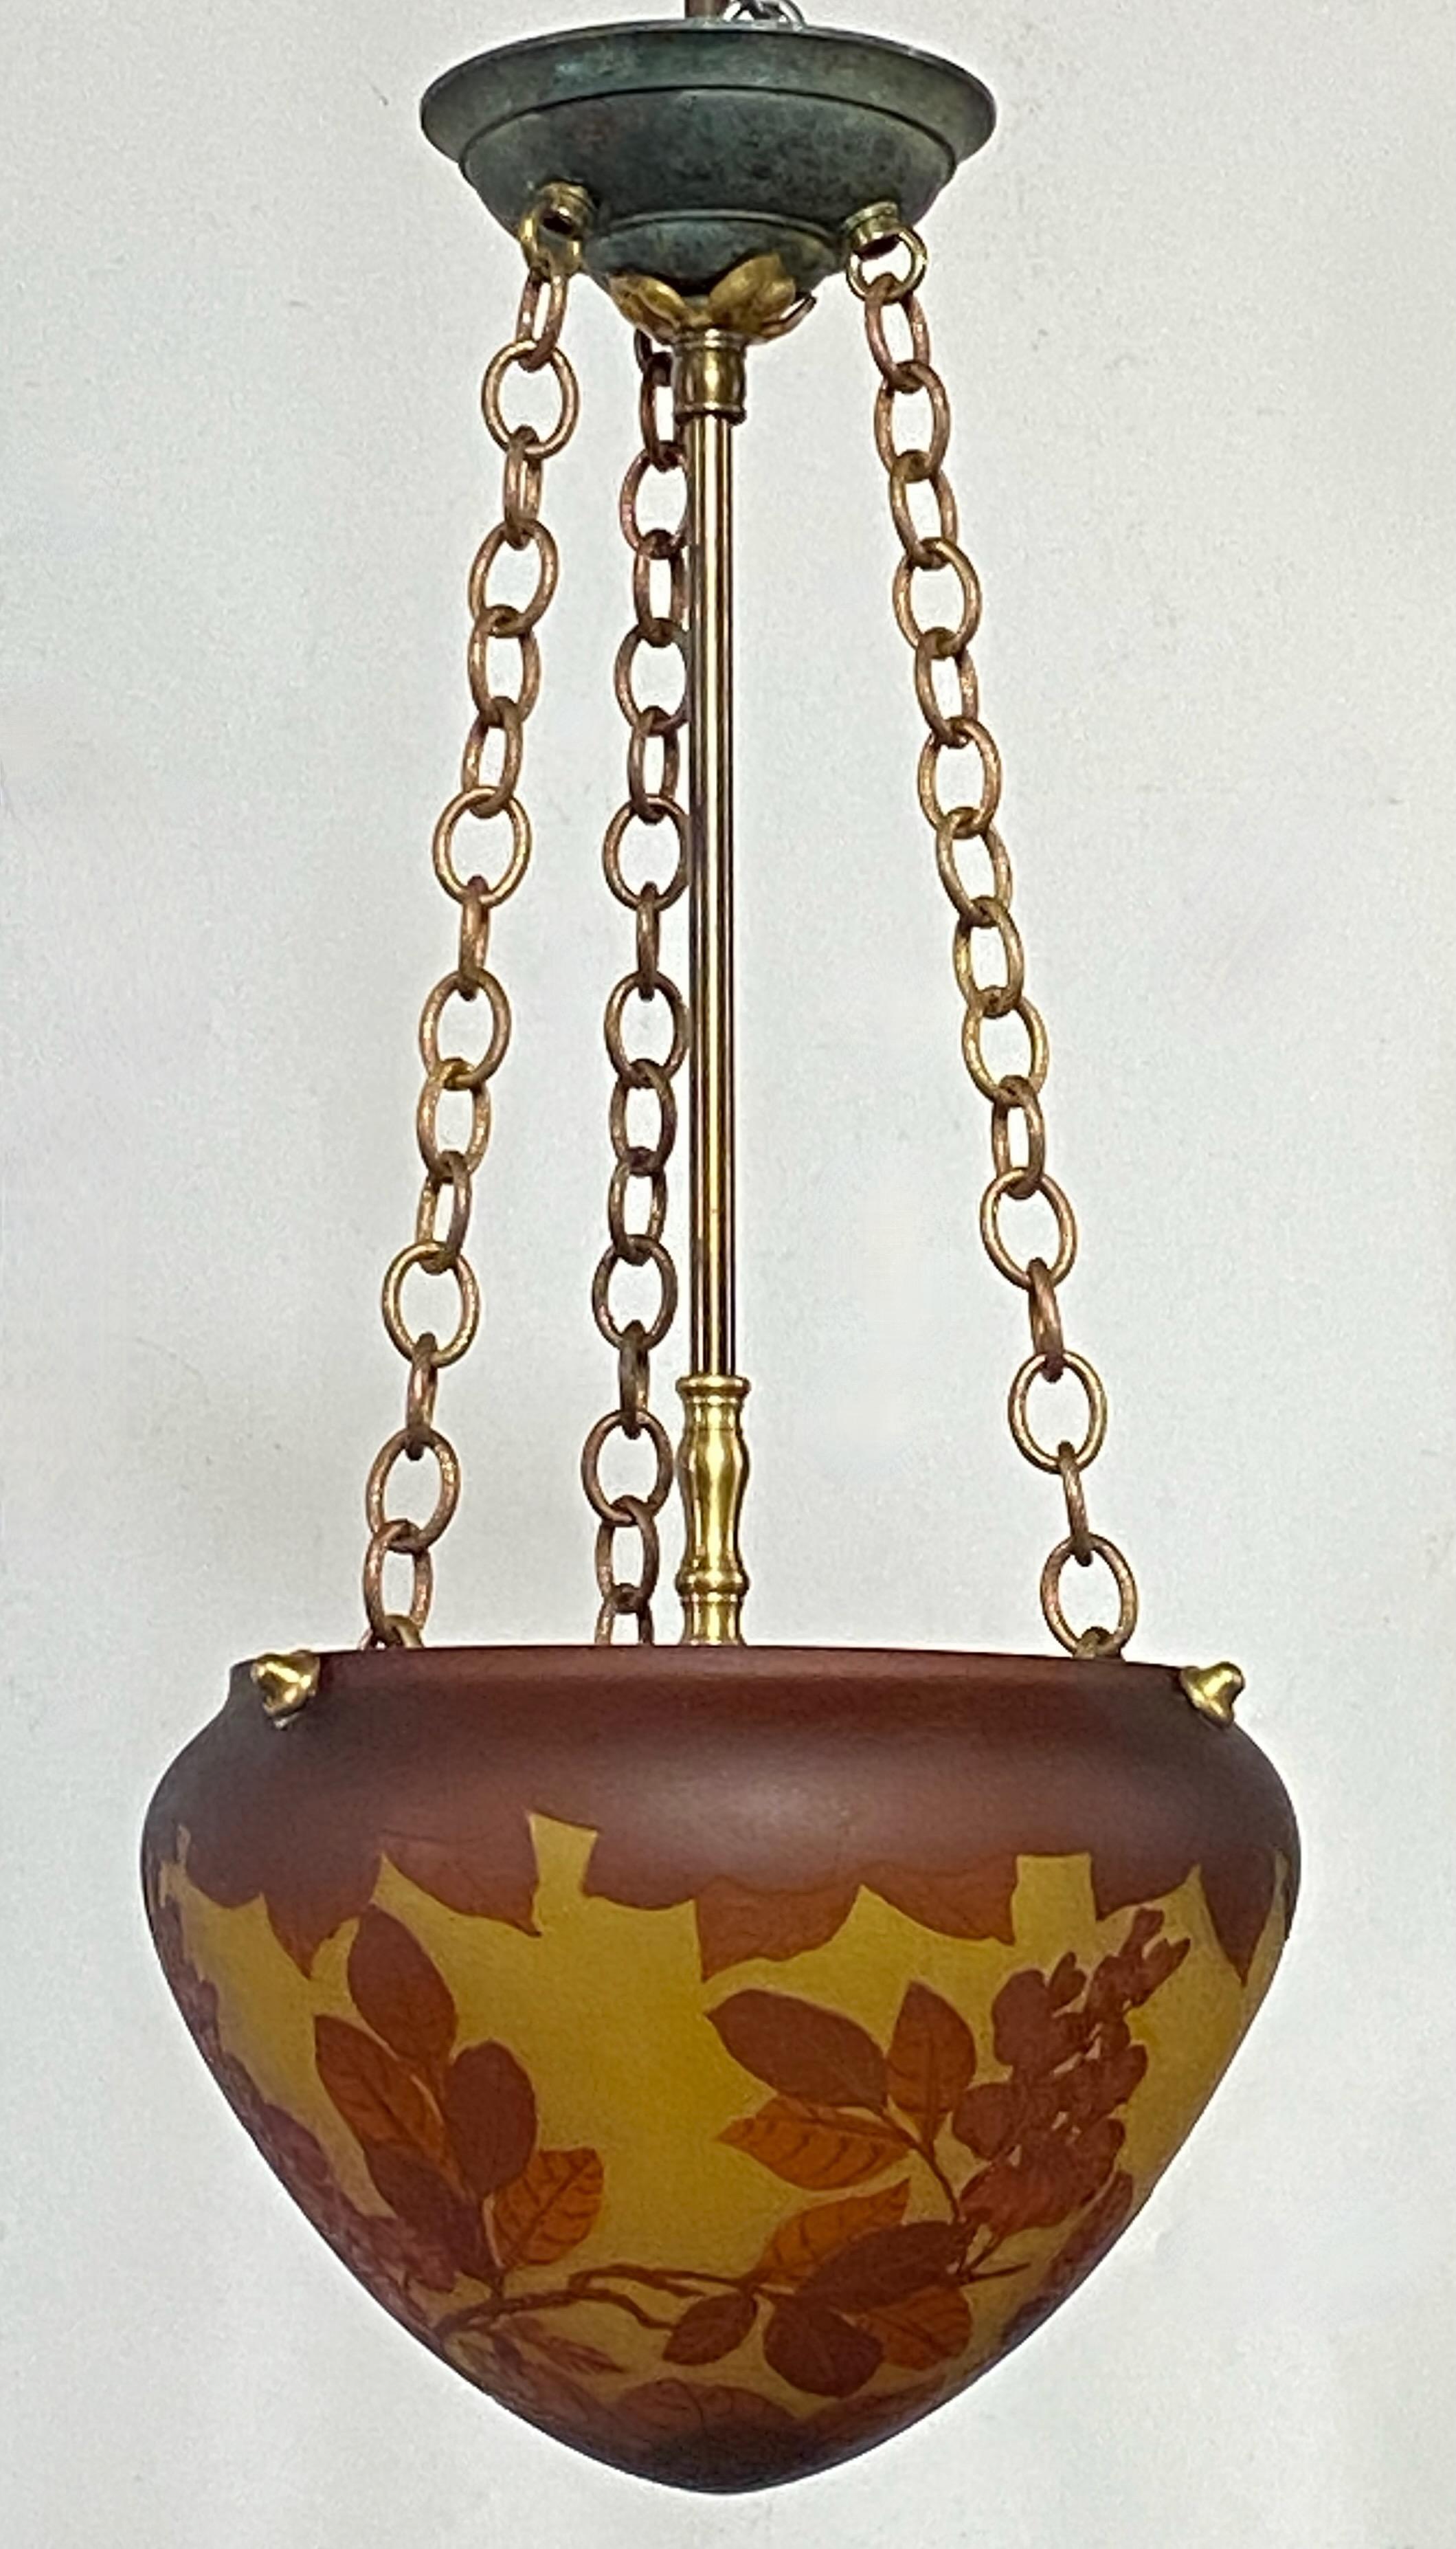 An exceptional French Art Nouveau period cameo glass pendant shape light fixture.
Braided copper chain with brass stem and canopy. 
Rewired for American standard and ready to install.
These photos do not do this light justice, shown with a too